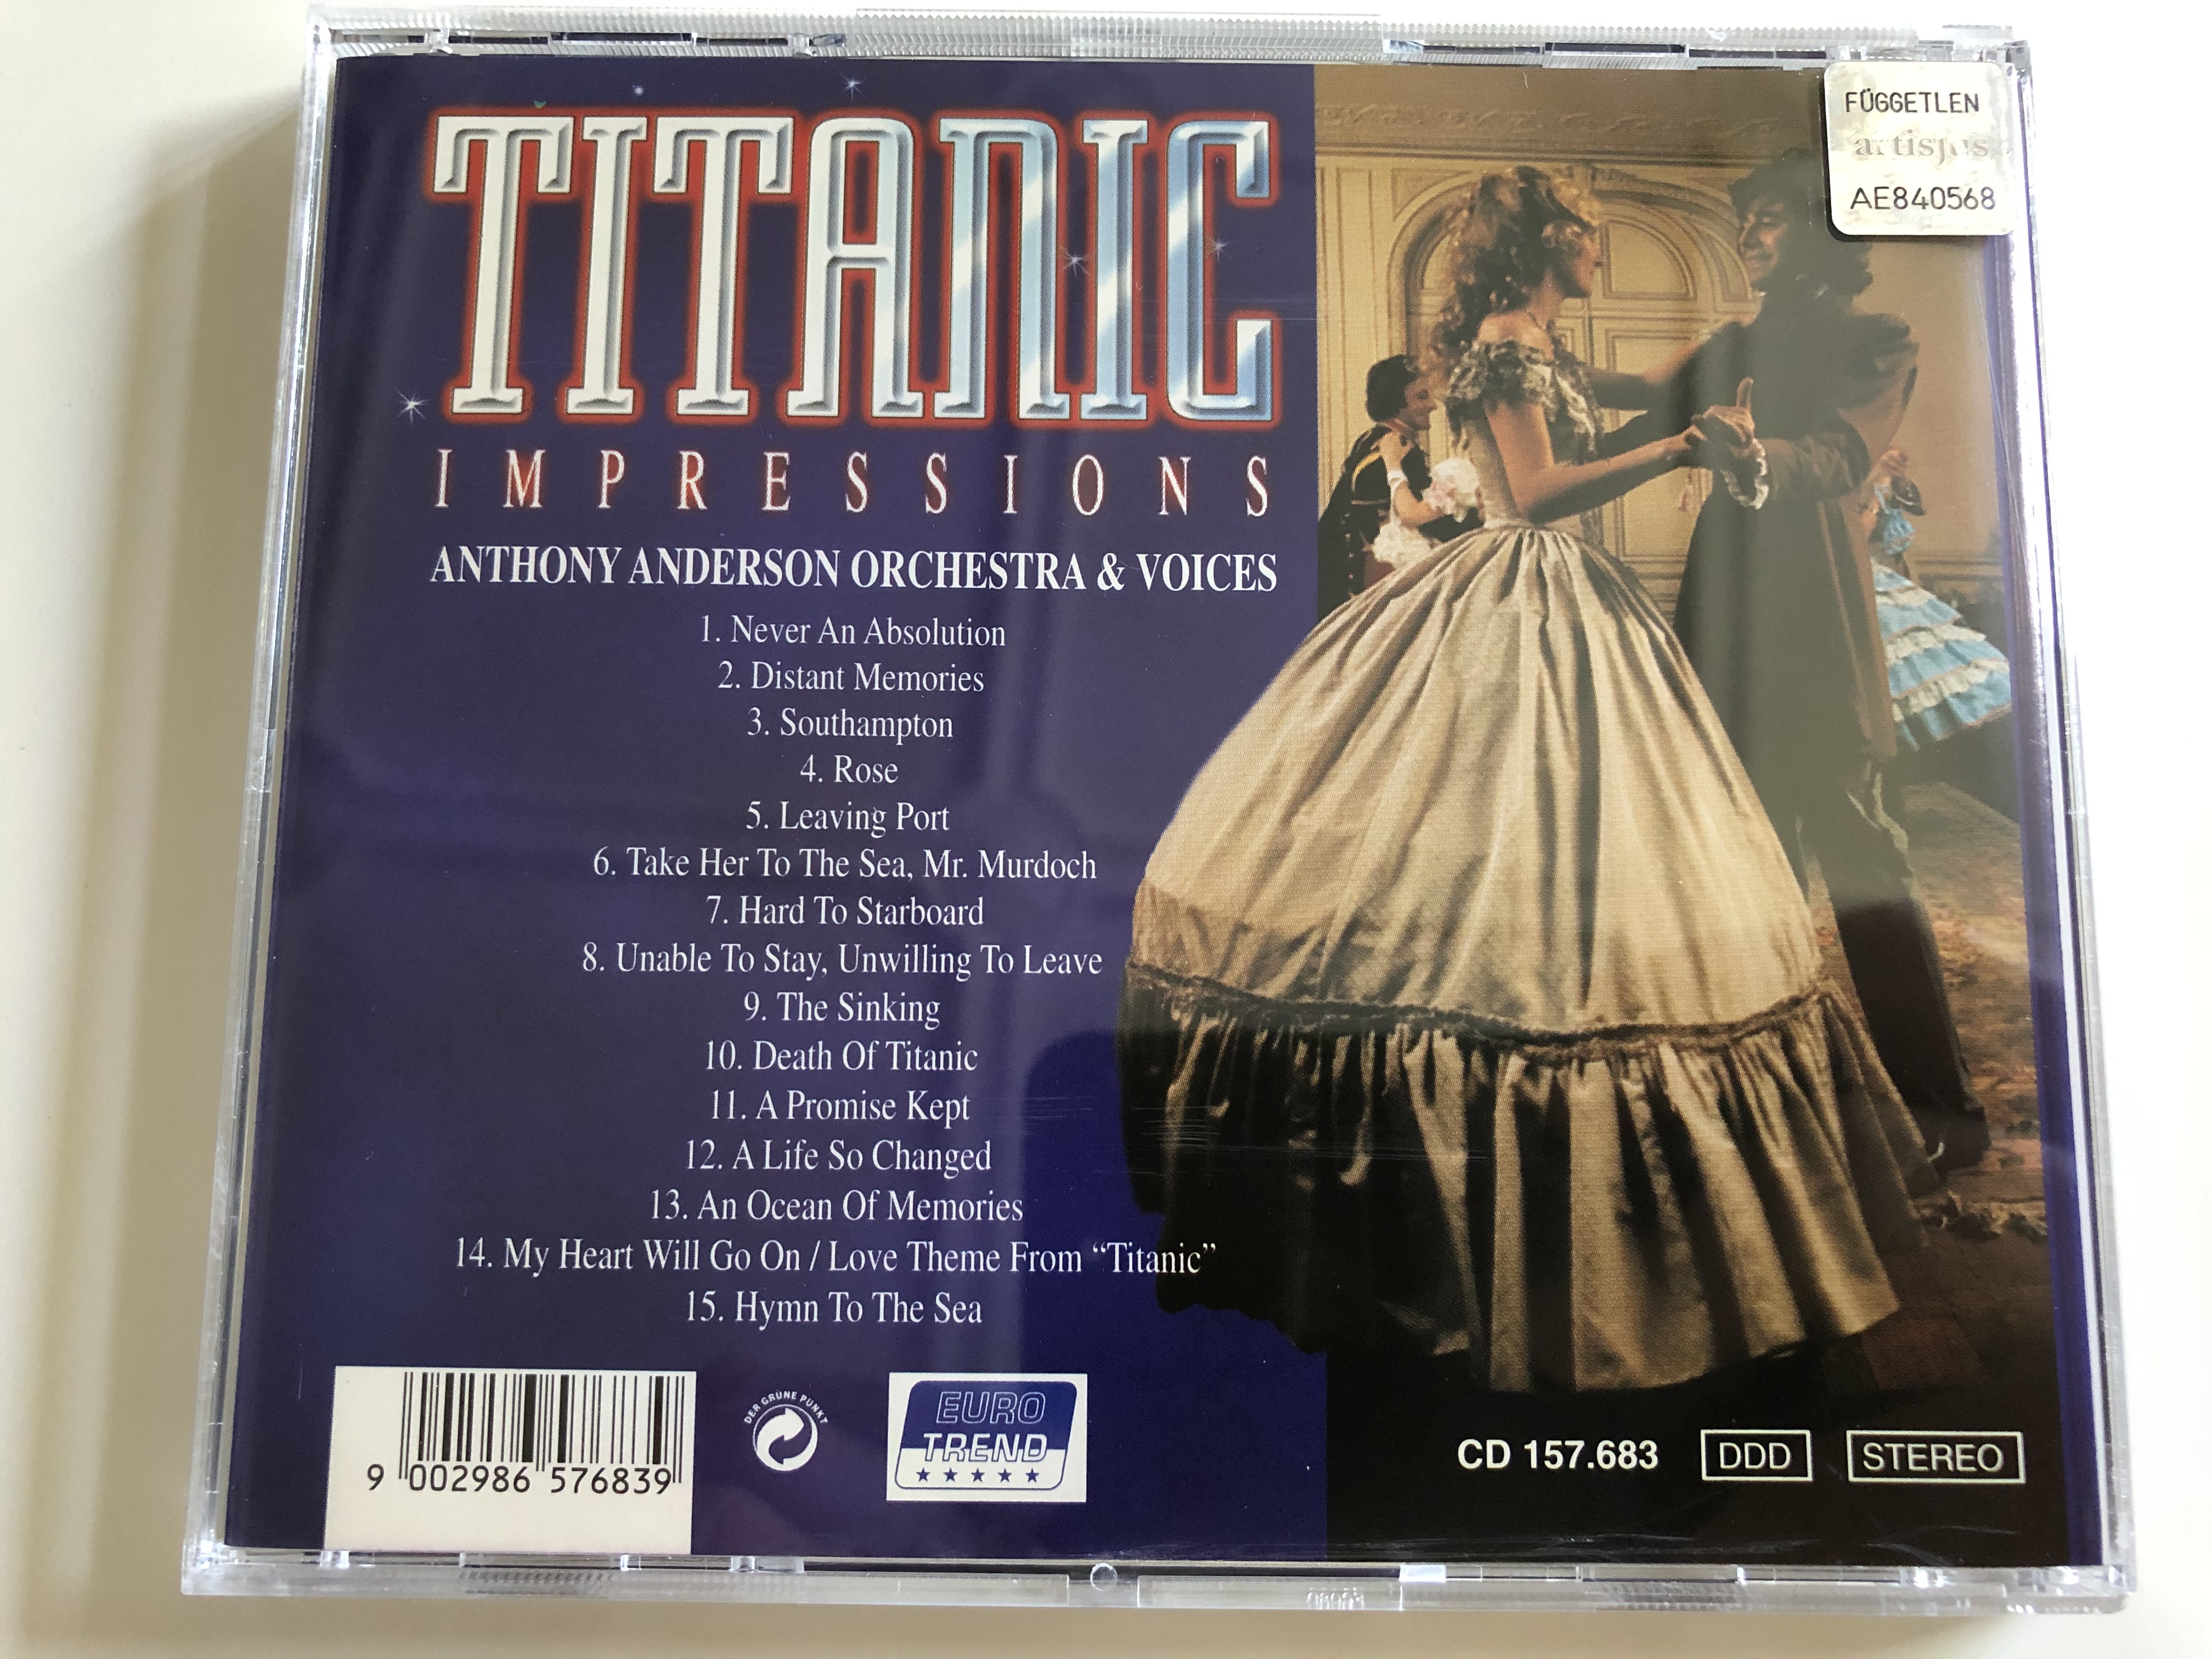 titanic-impressions-music-from-the-motion-picture-anthony-anderson-orchestra-voices-digital-non-original-versions-audio-cd-5-.jpg